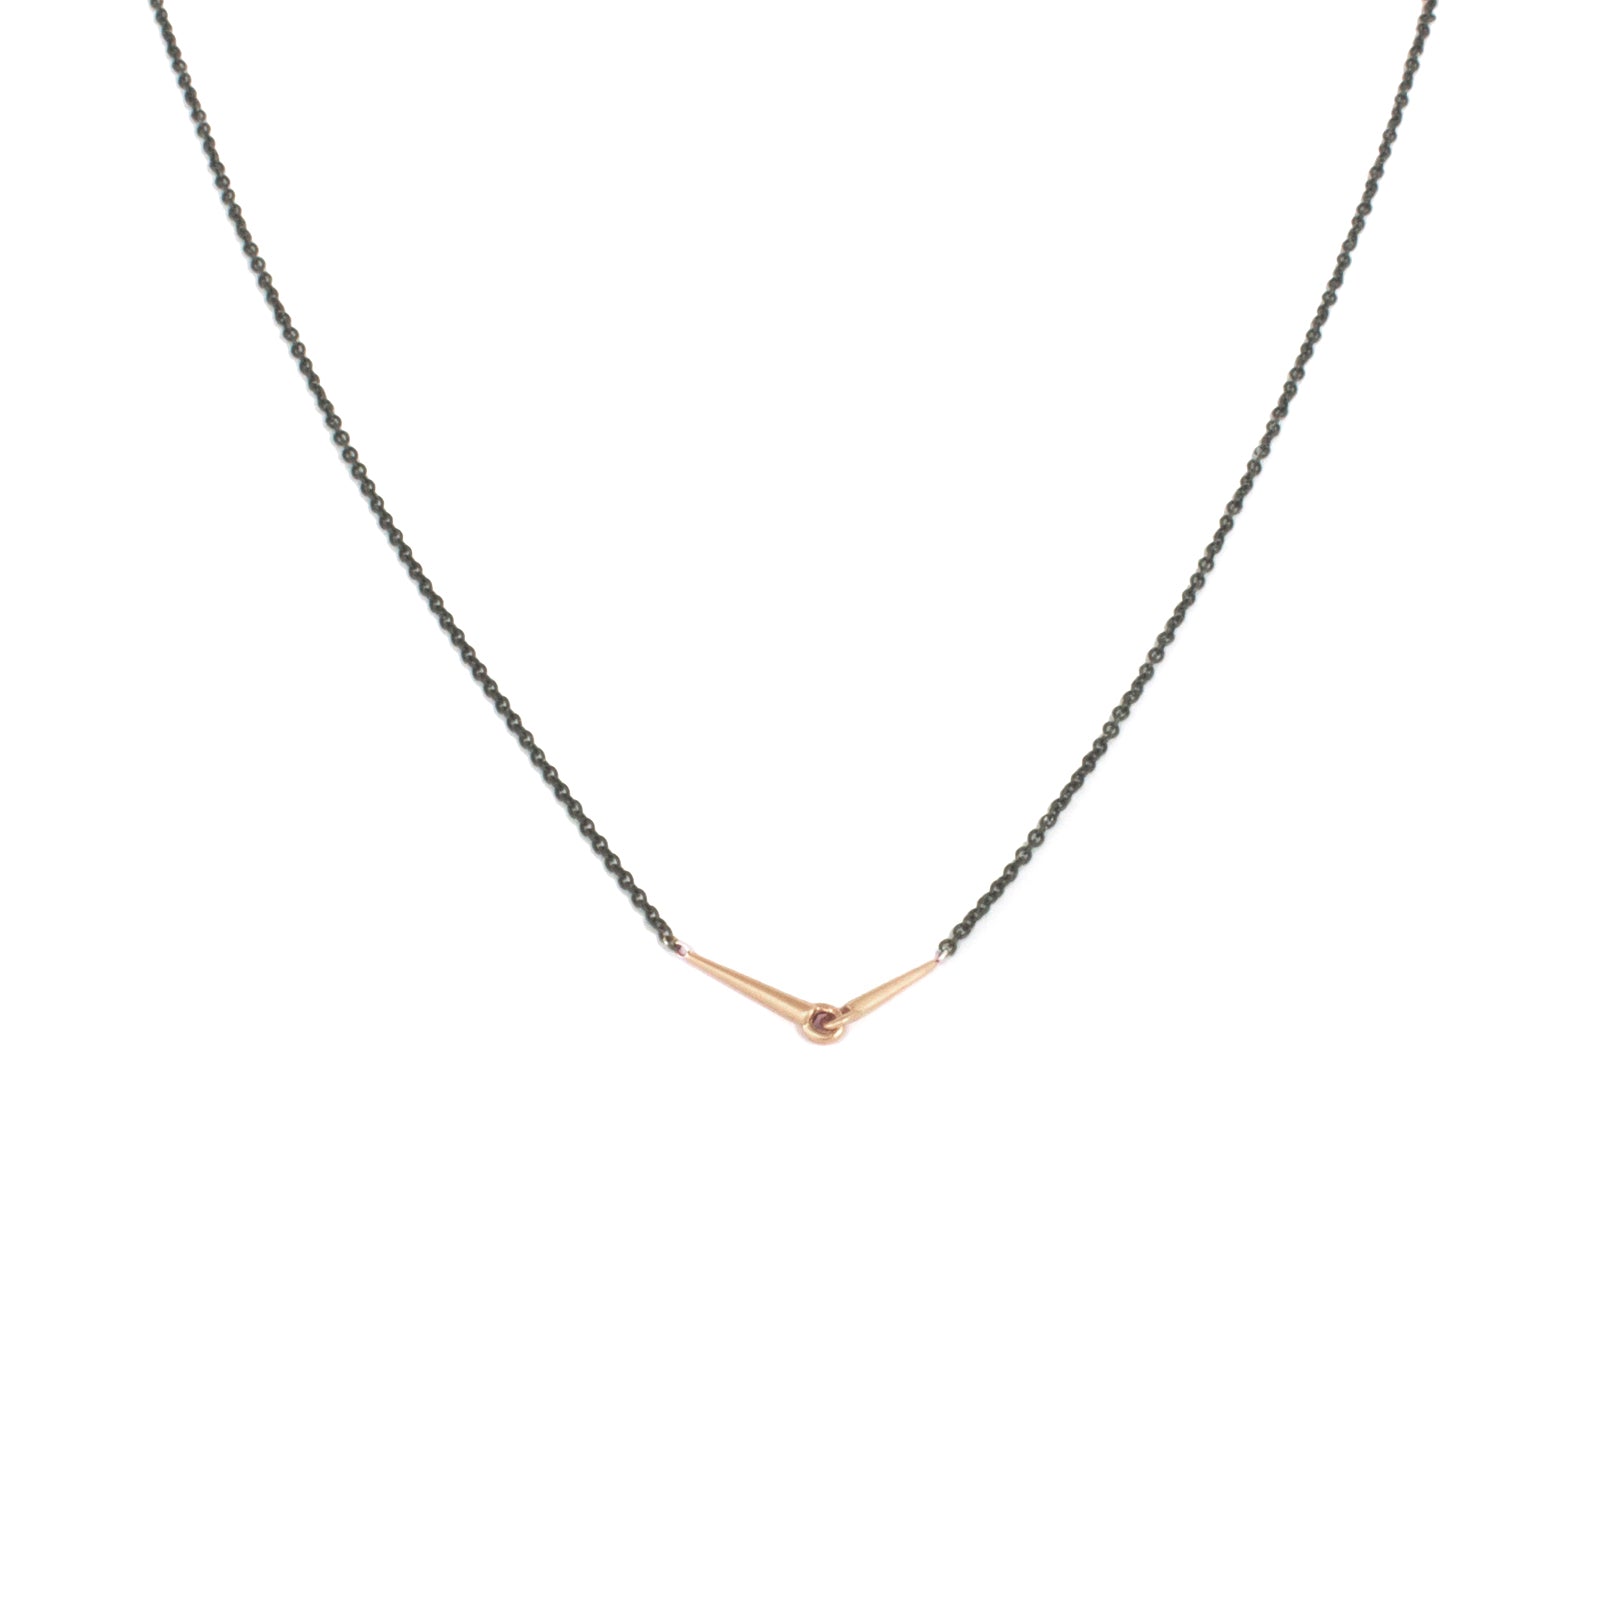 18k rose gold with oxidized silver chain / small mirror points necklace